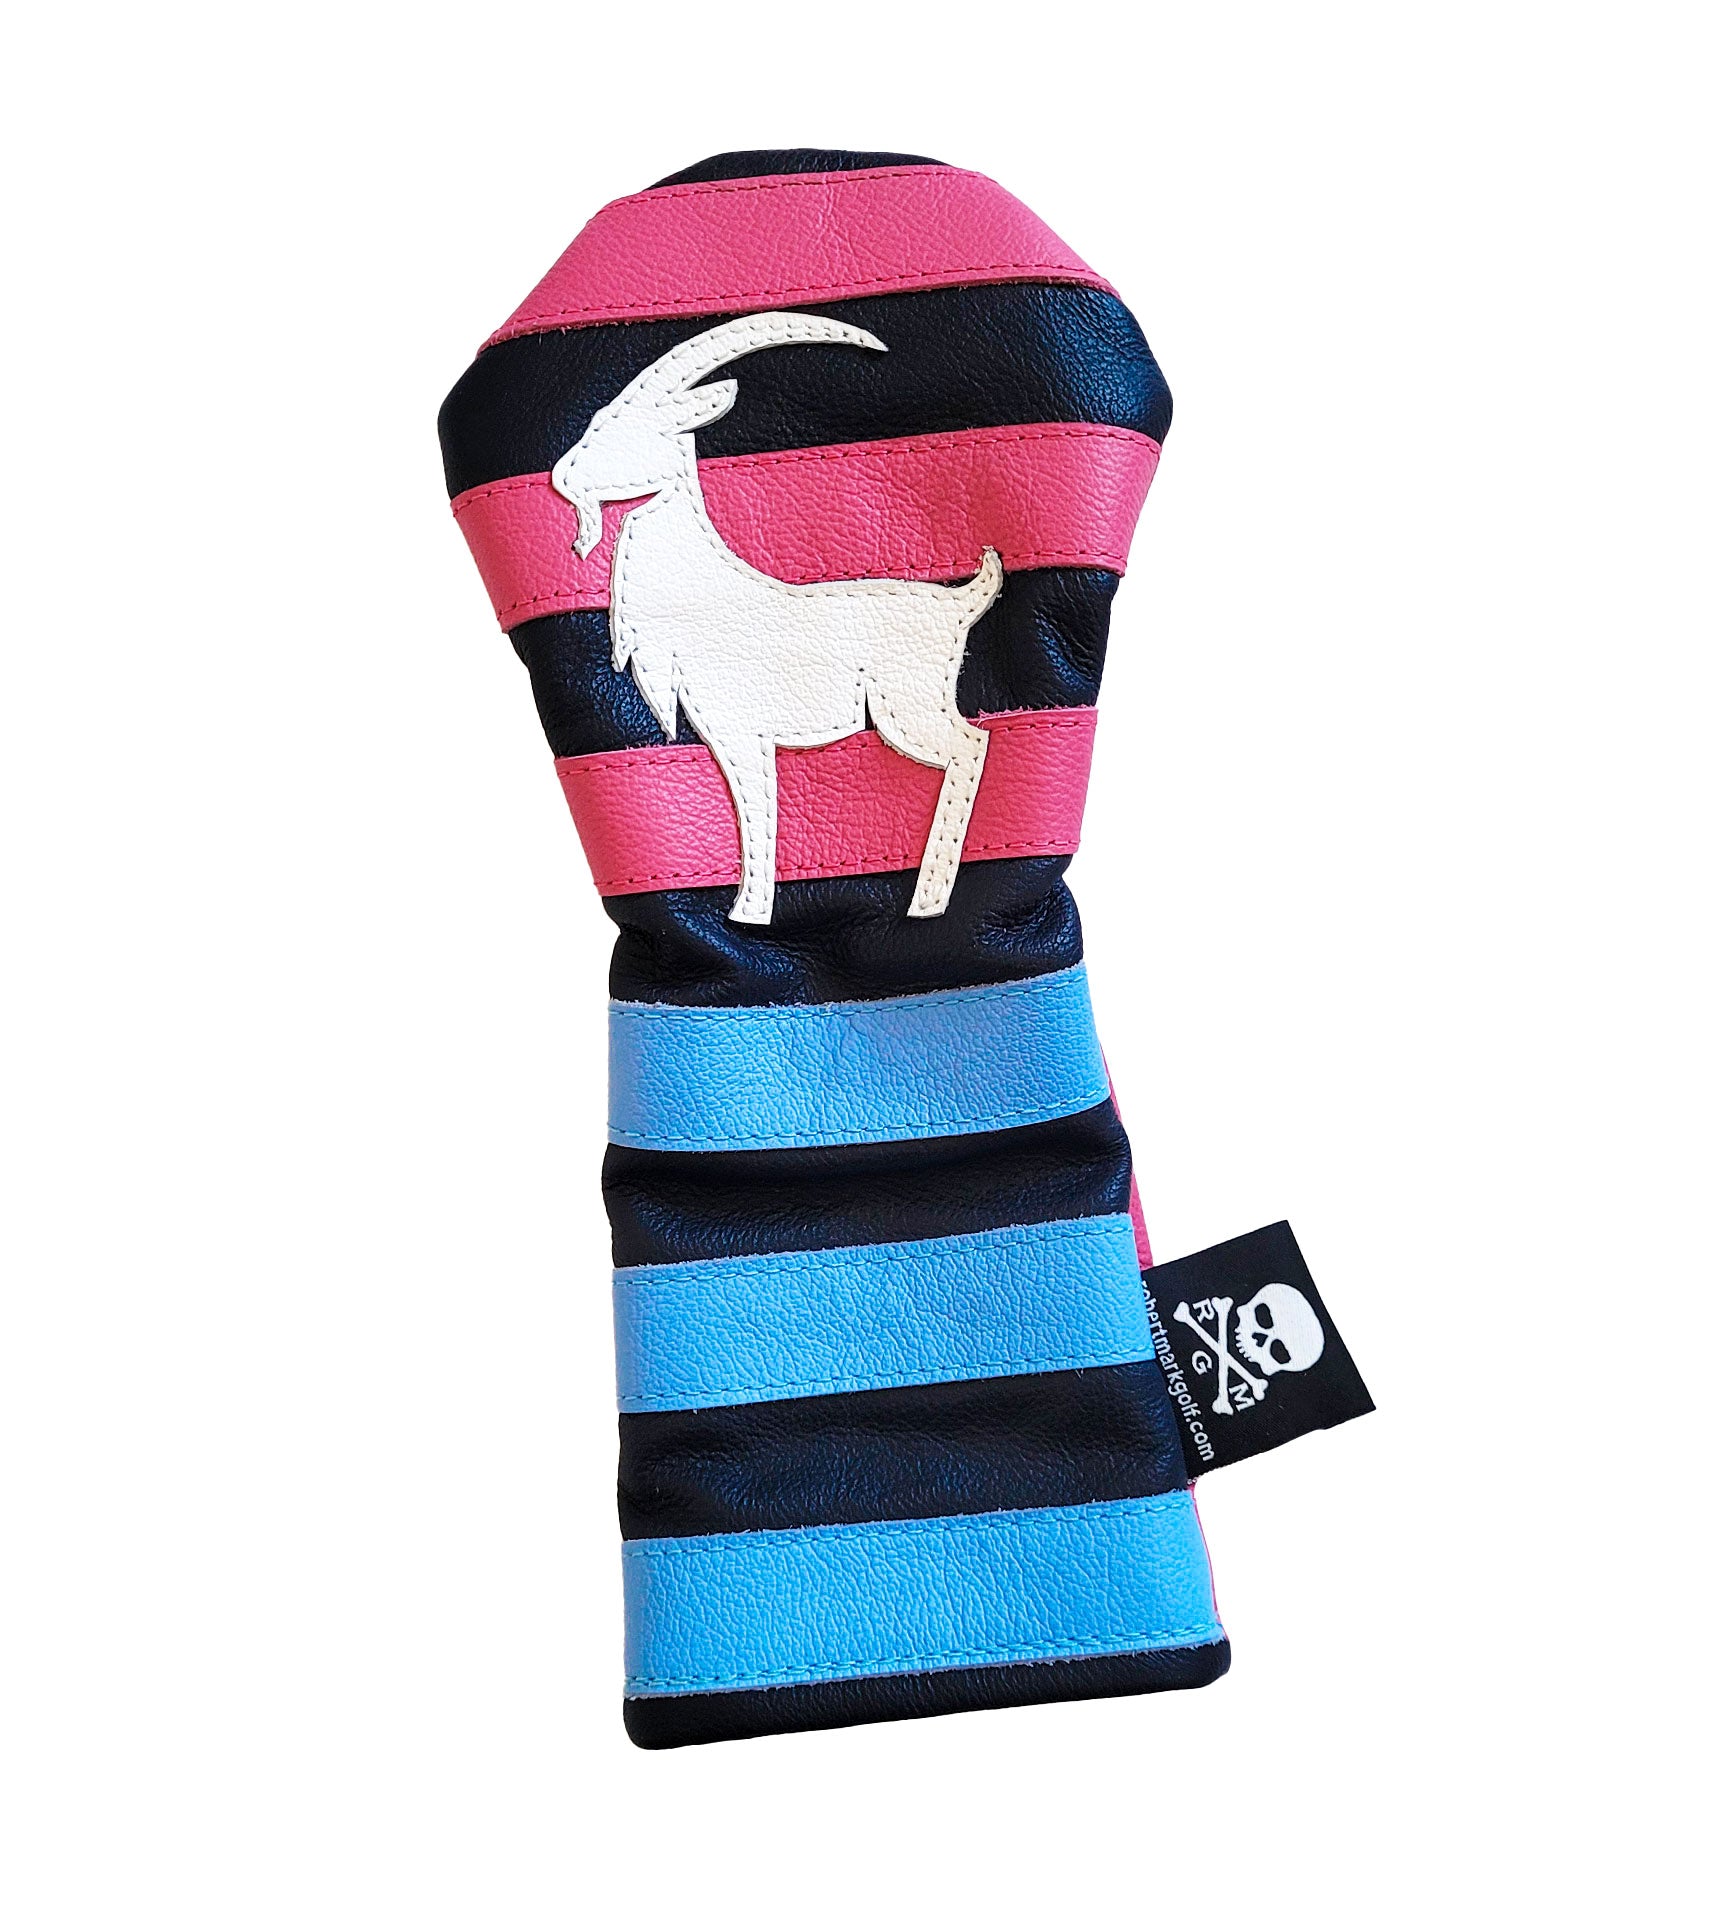 One-Of-A-Kind! The "GOAT" Rugby Stripes Fairway Wood Headcover - Robert Mark Golf